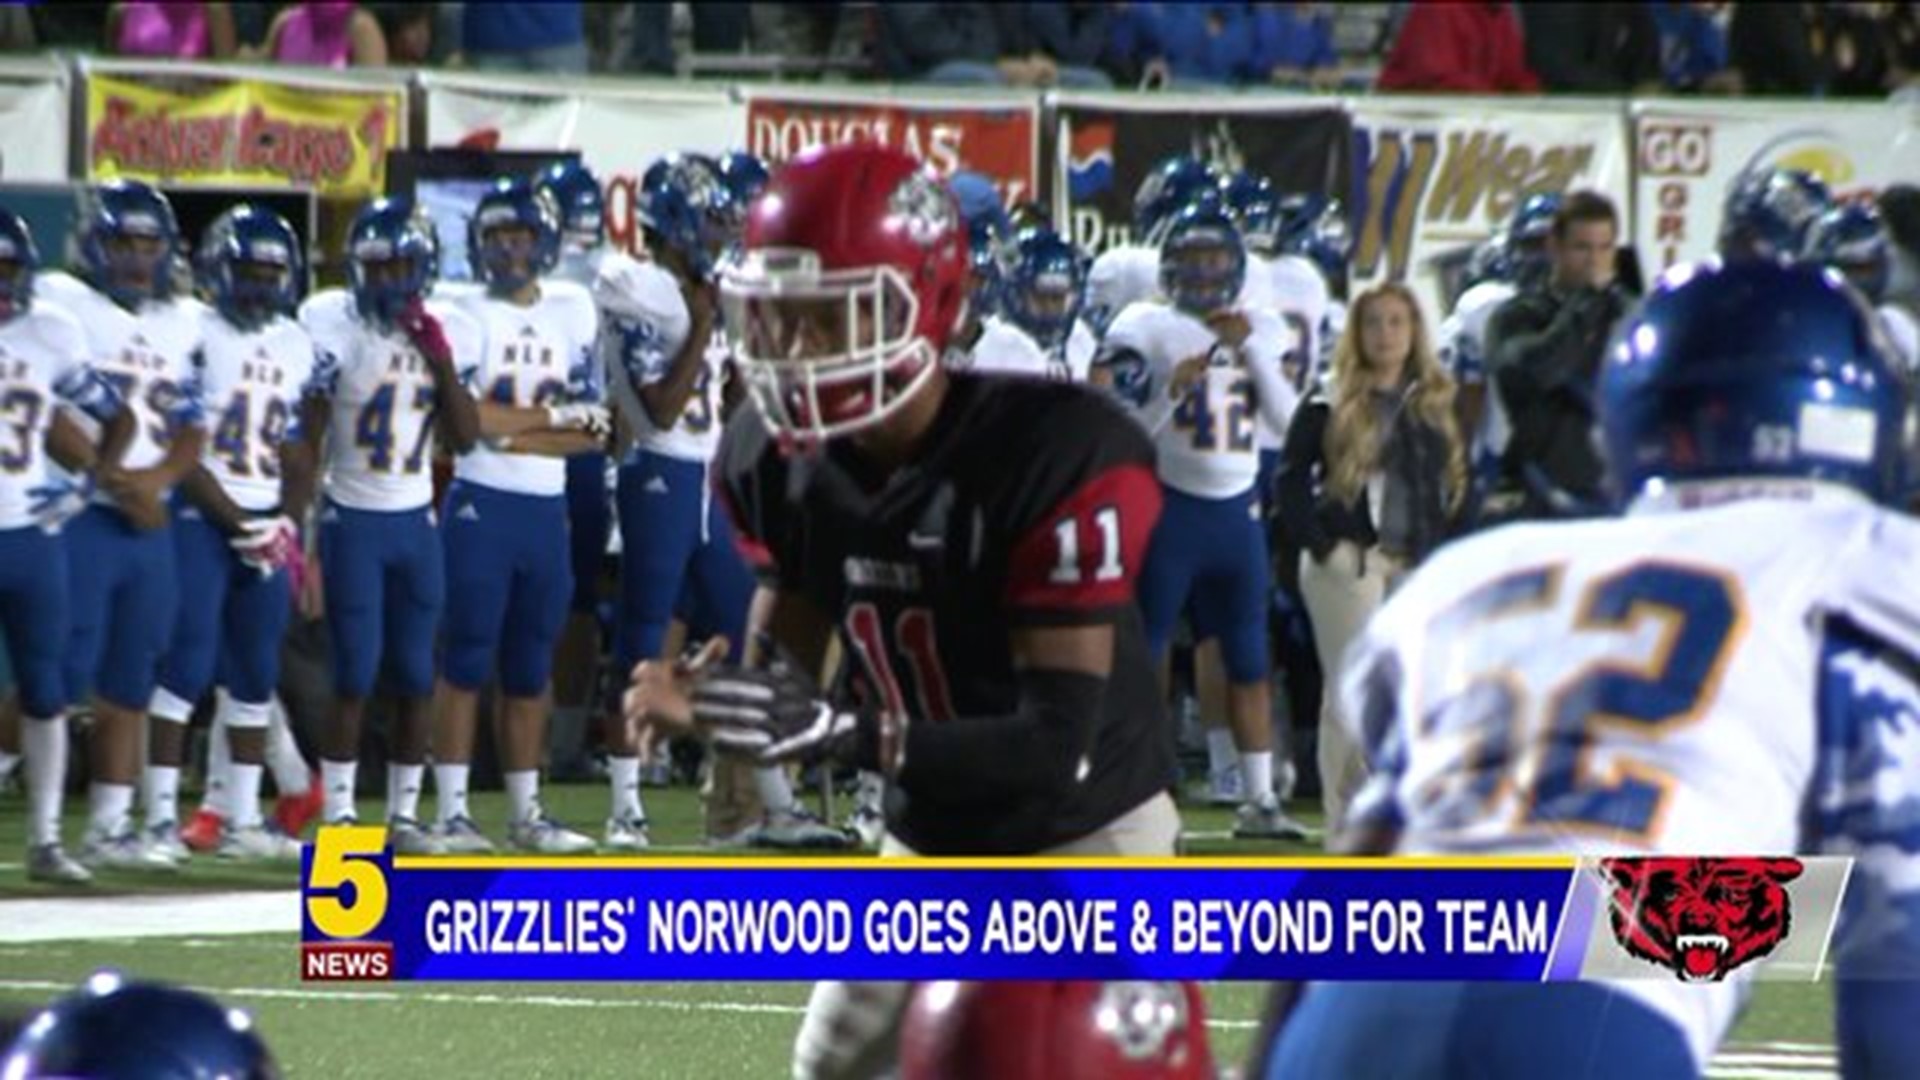 Grizzlies` Norwood Goes Above and Beyond For Team